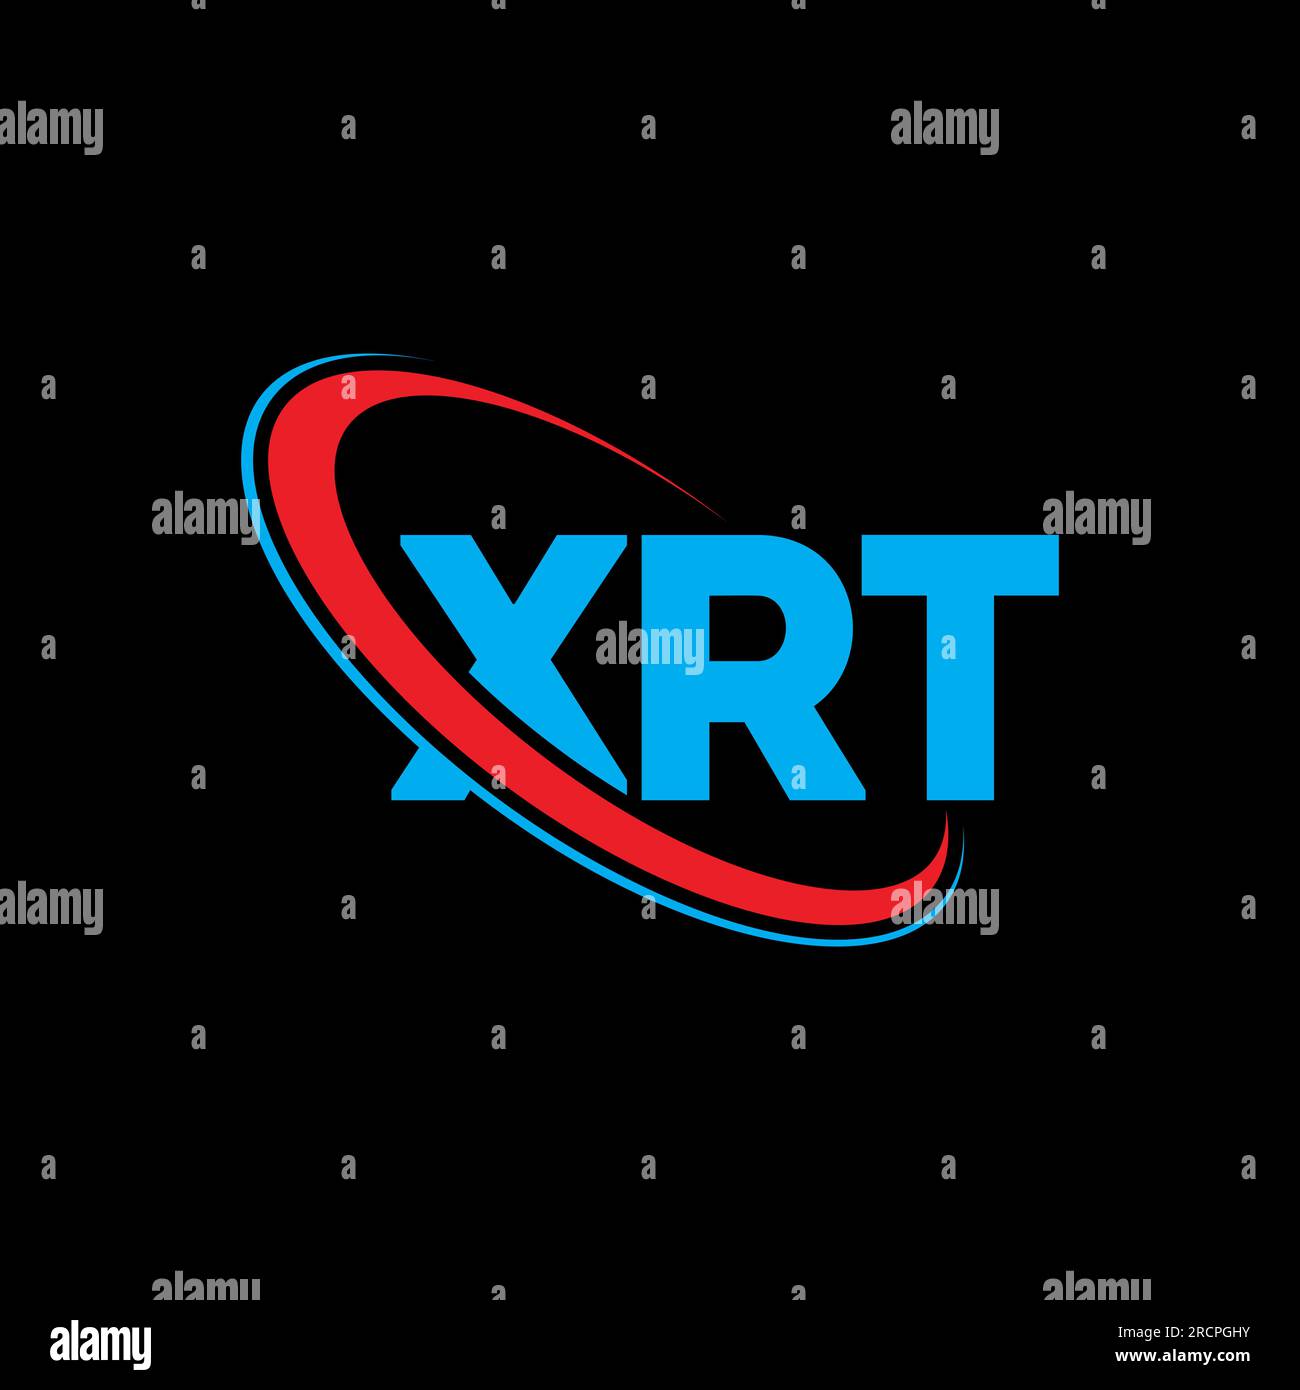 Xrt letter Stock Vector Images